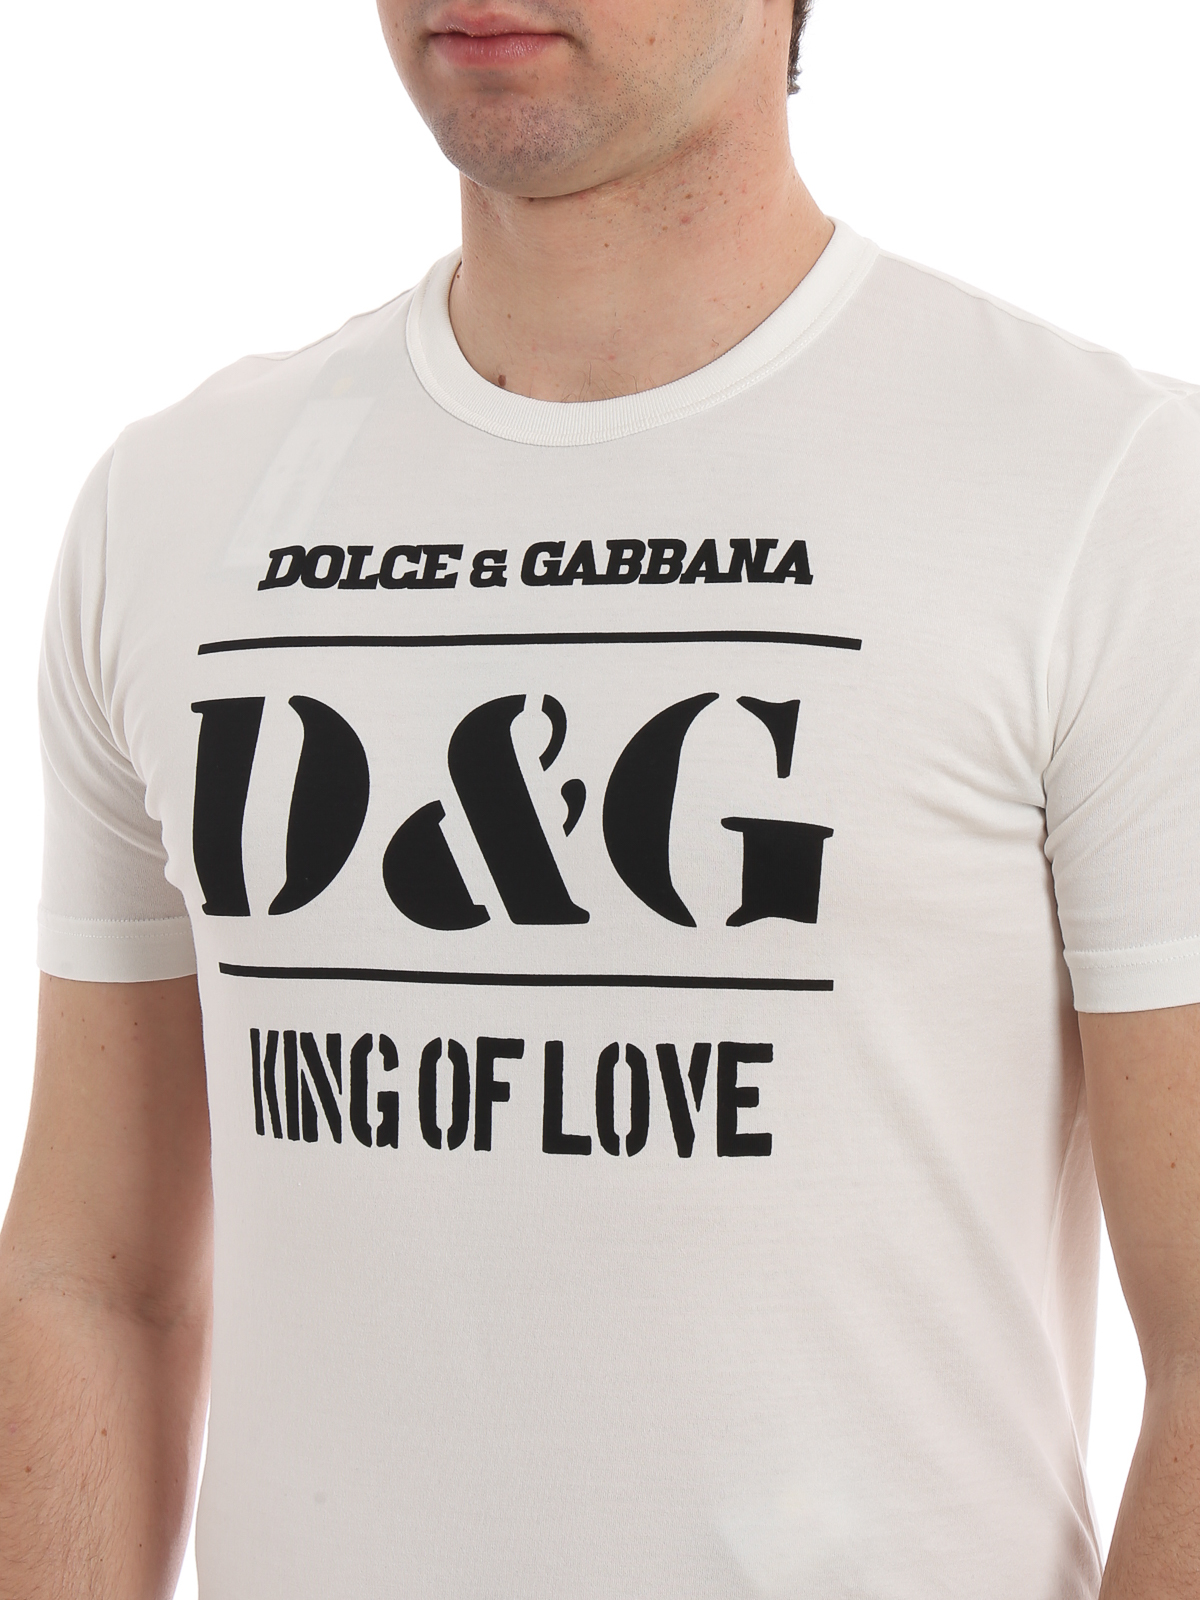 dolce gabbana king i was there